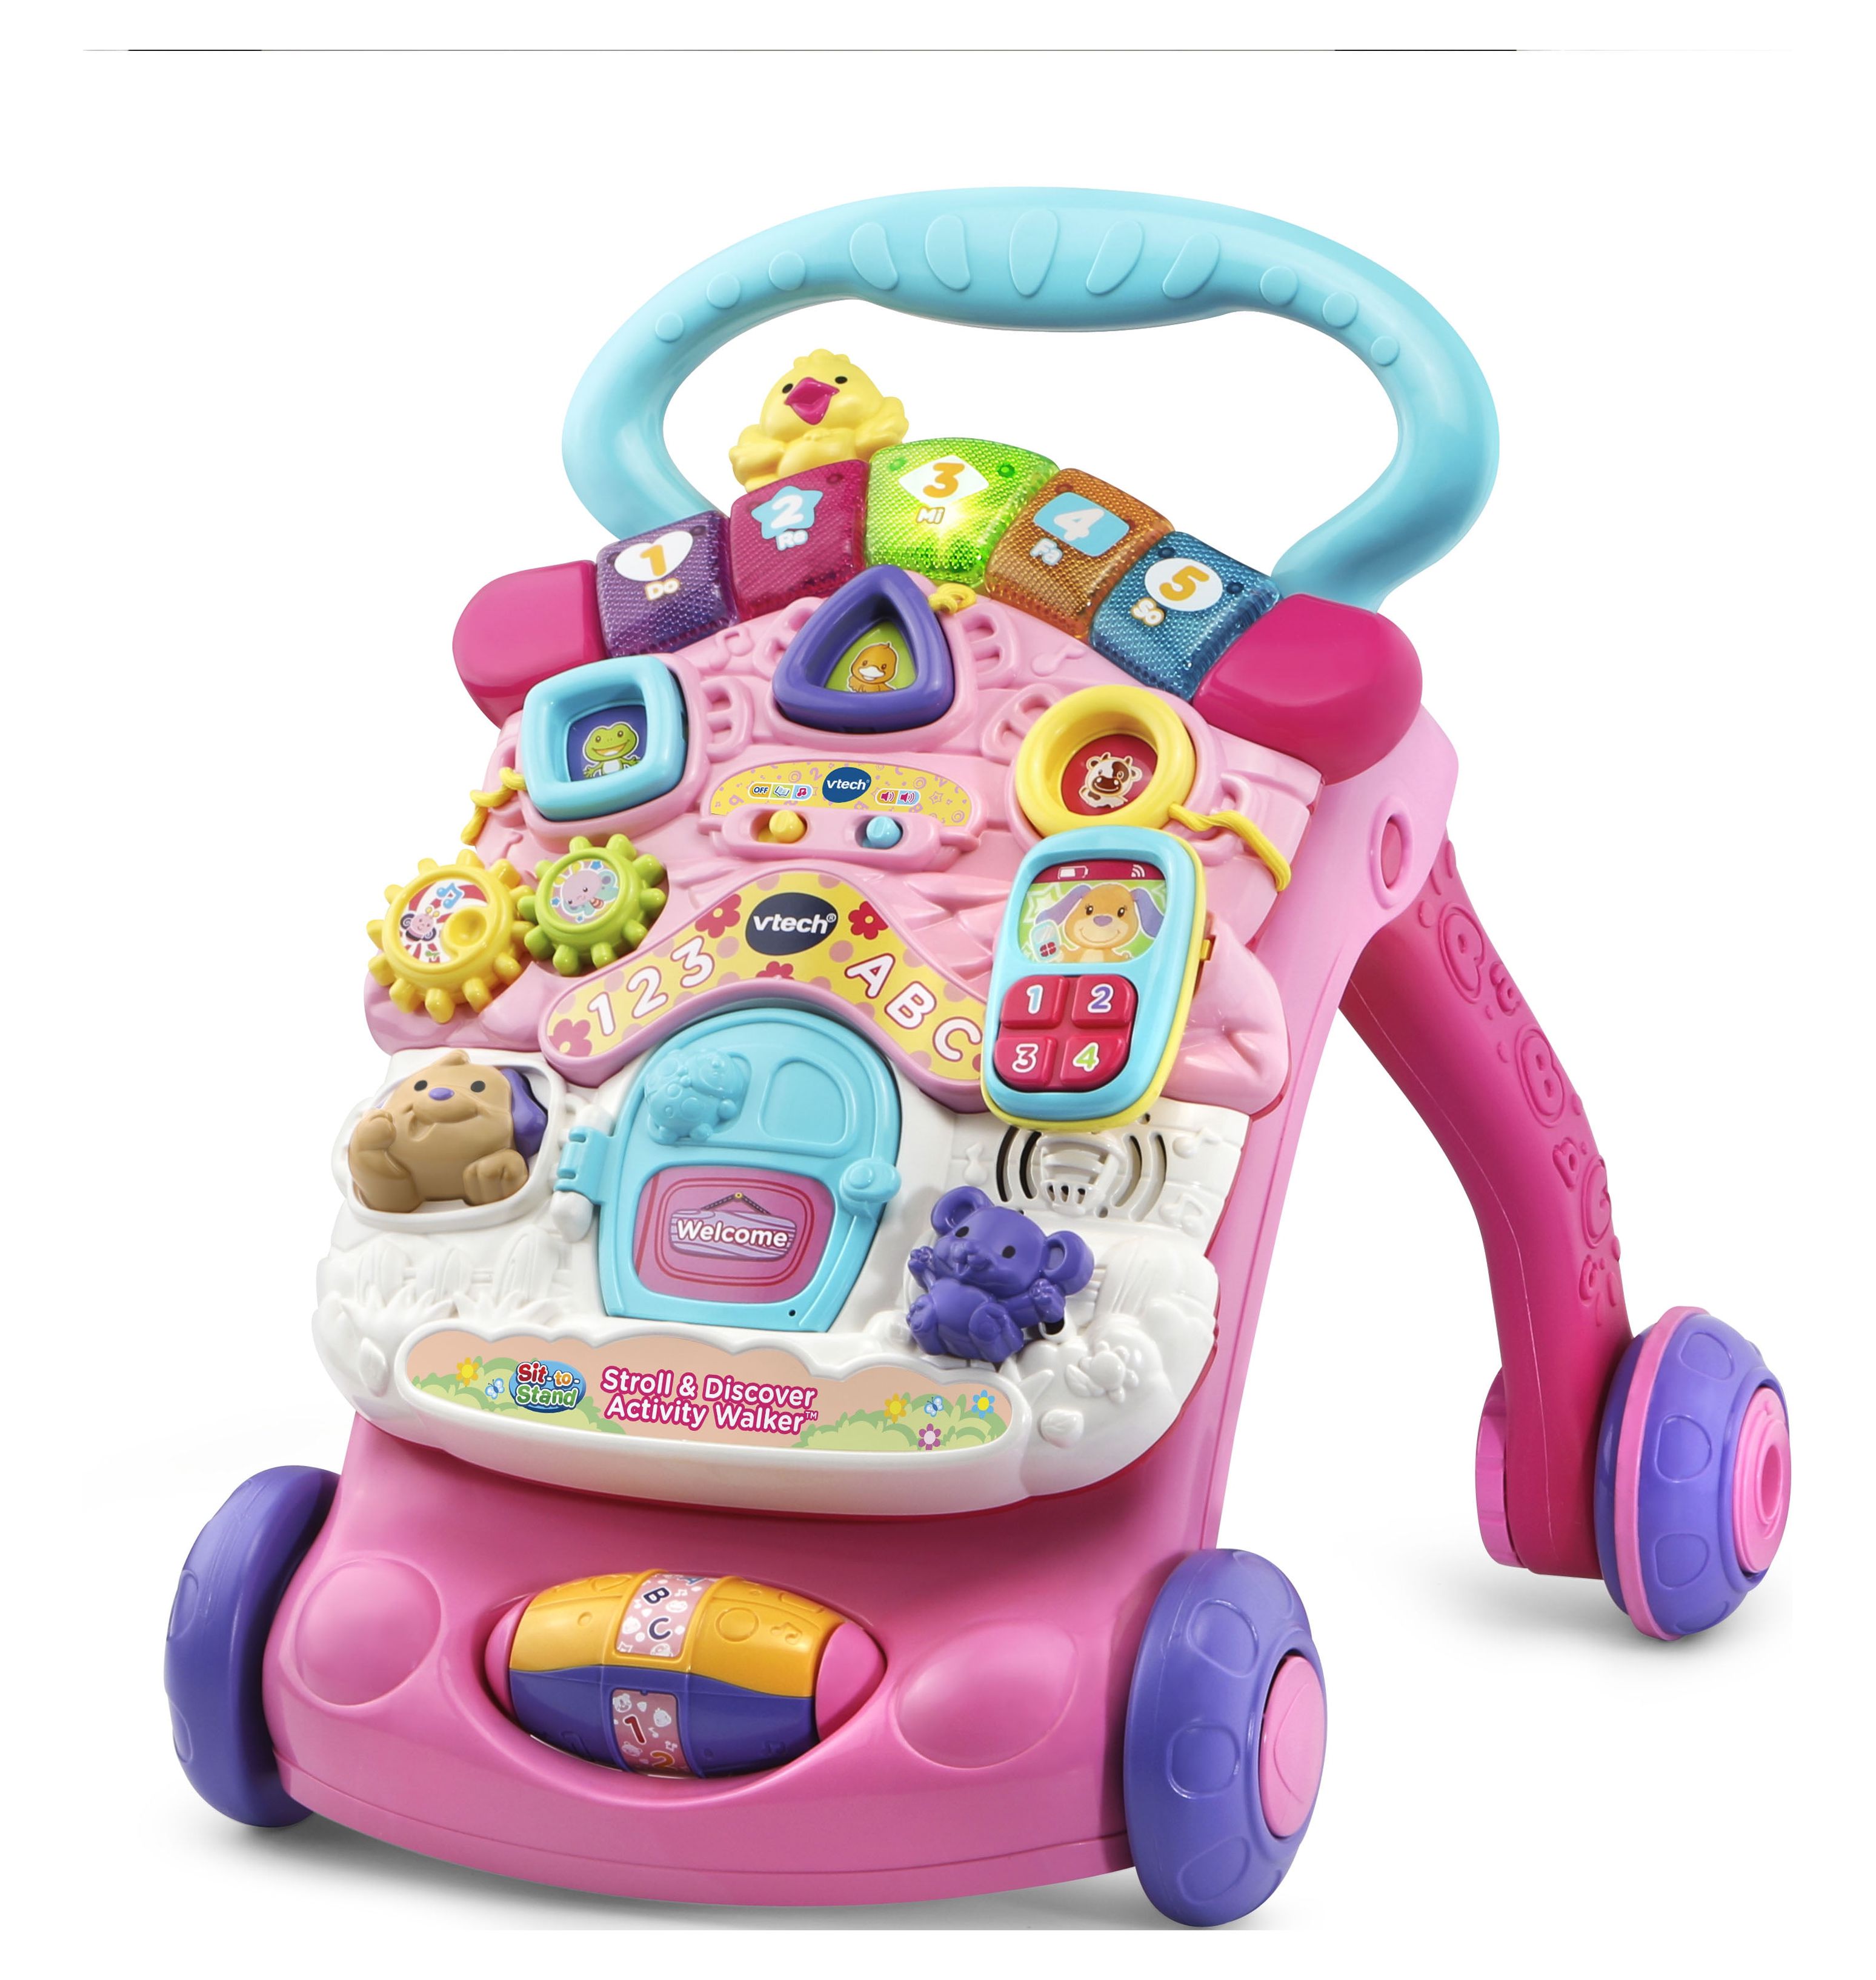 VTech® Stroll & Discover Activity Walker™ 2 -in-1 Pink Toddler Toy 9–36 months - image 1 of 5